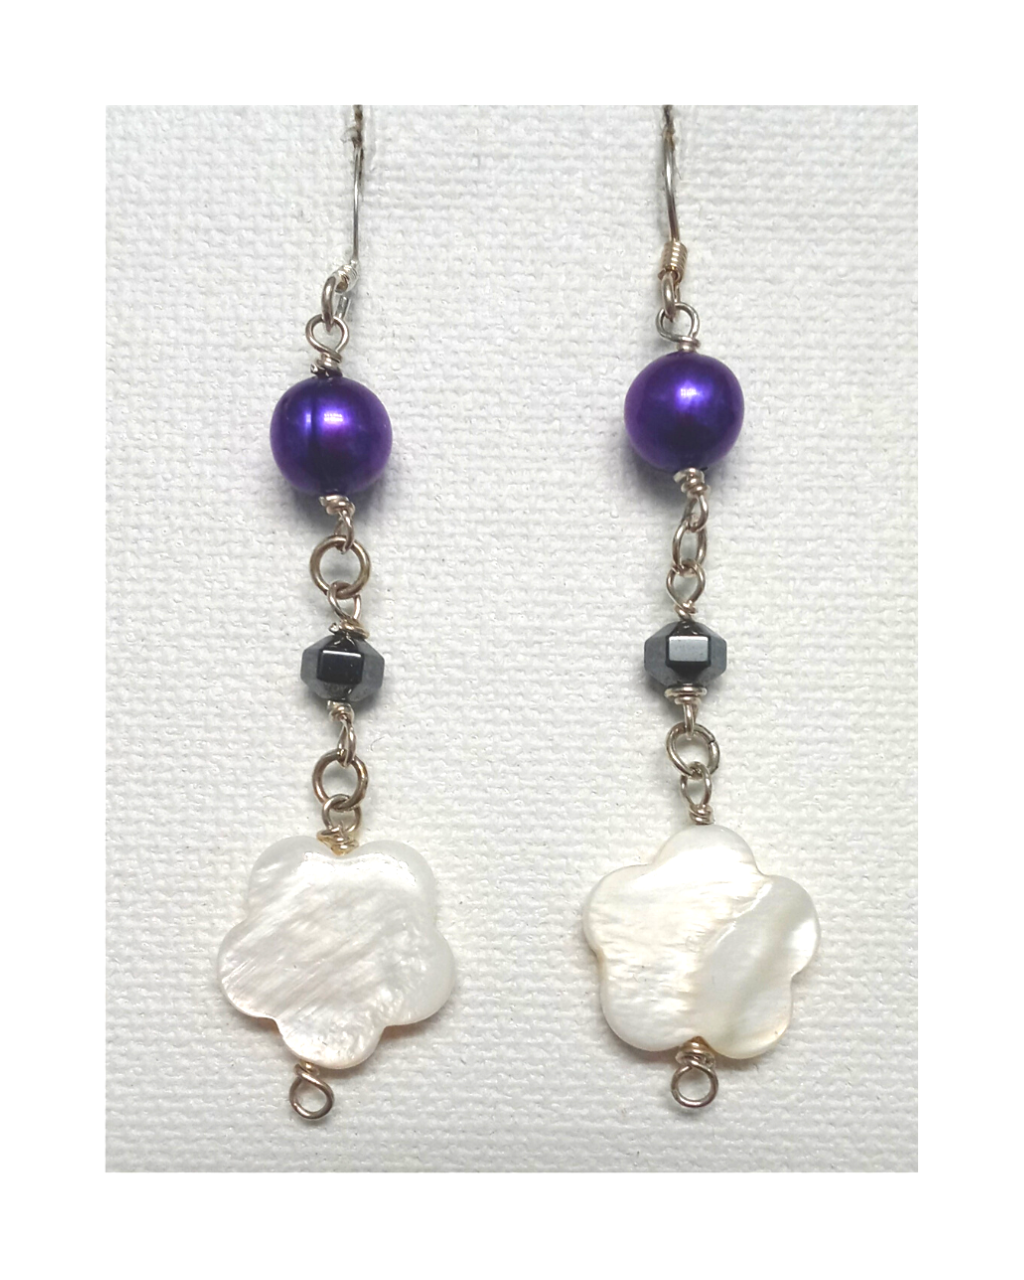 Dyed Purple Pearl, Faceted Hematite, and Mother-of-Pearl Flower-Shaped Sterling Silver Dangle Earrings approx. 2 5/8"